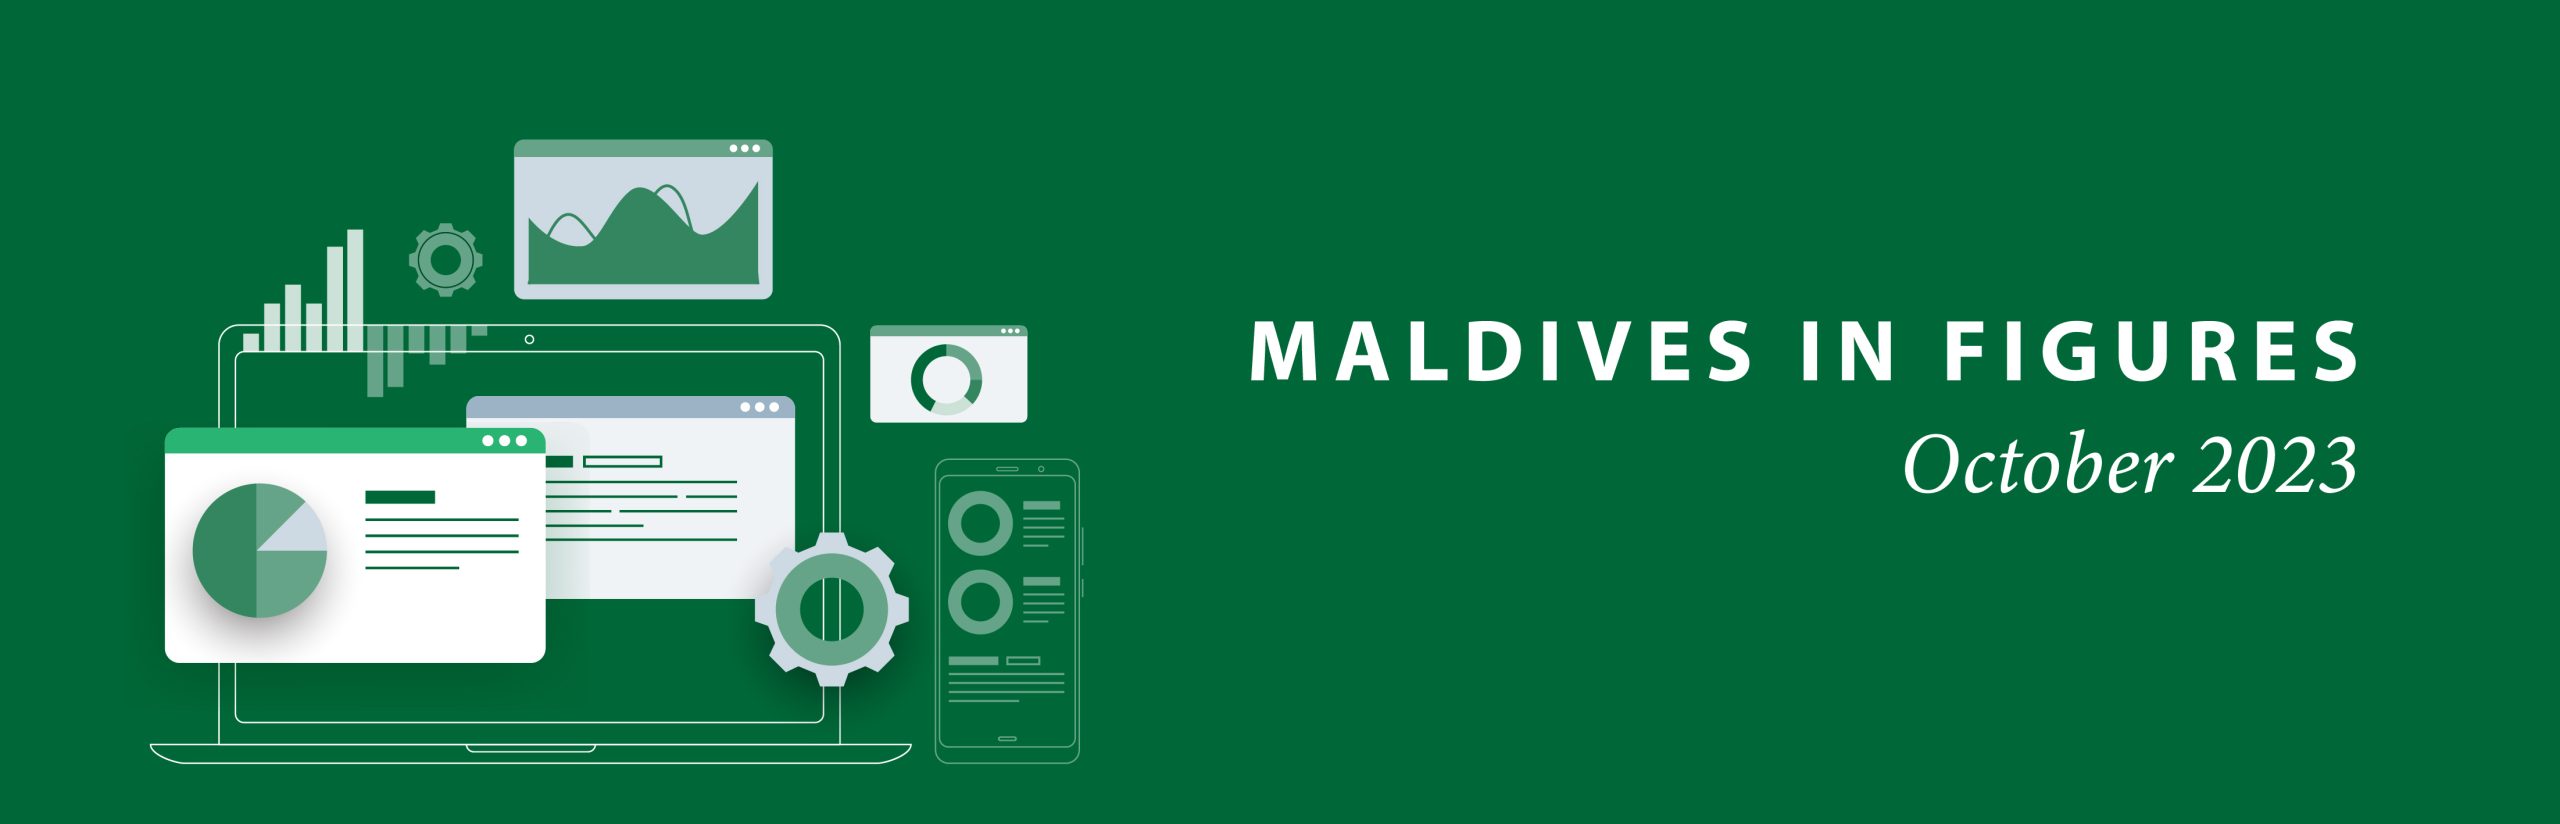 Maldives in Figures – Oct 2023